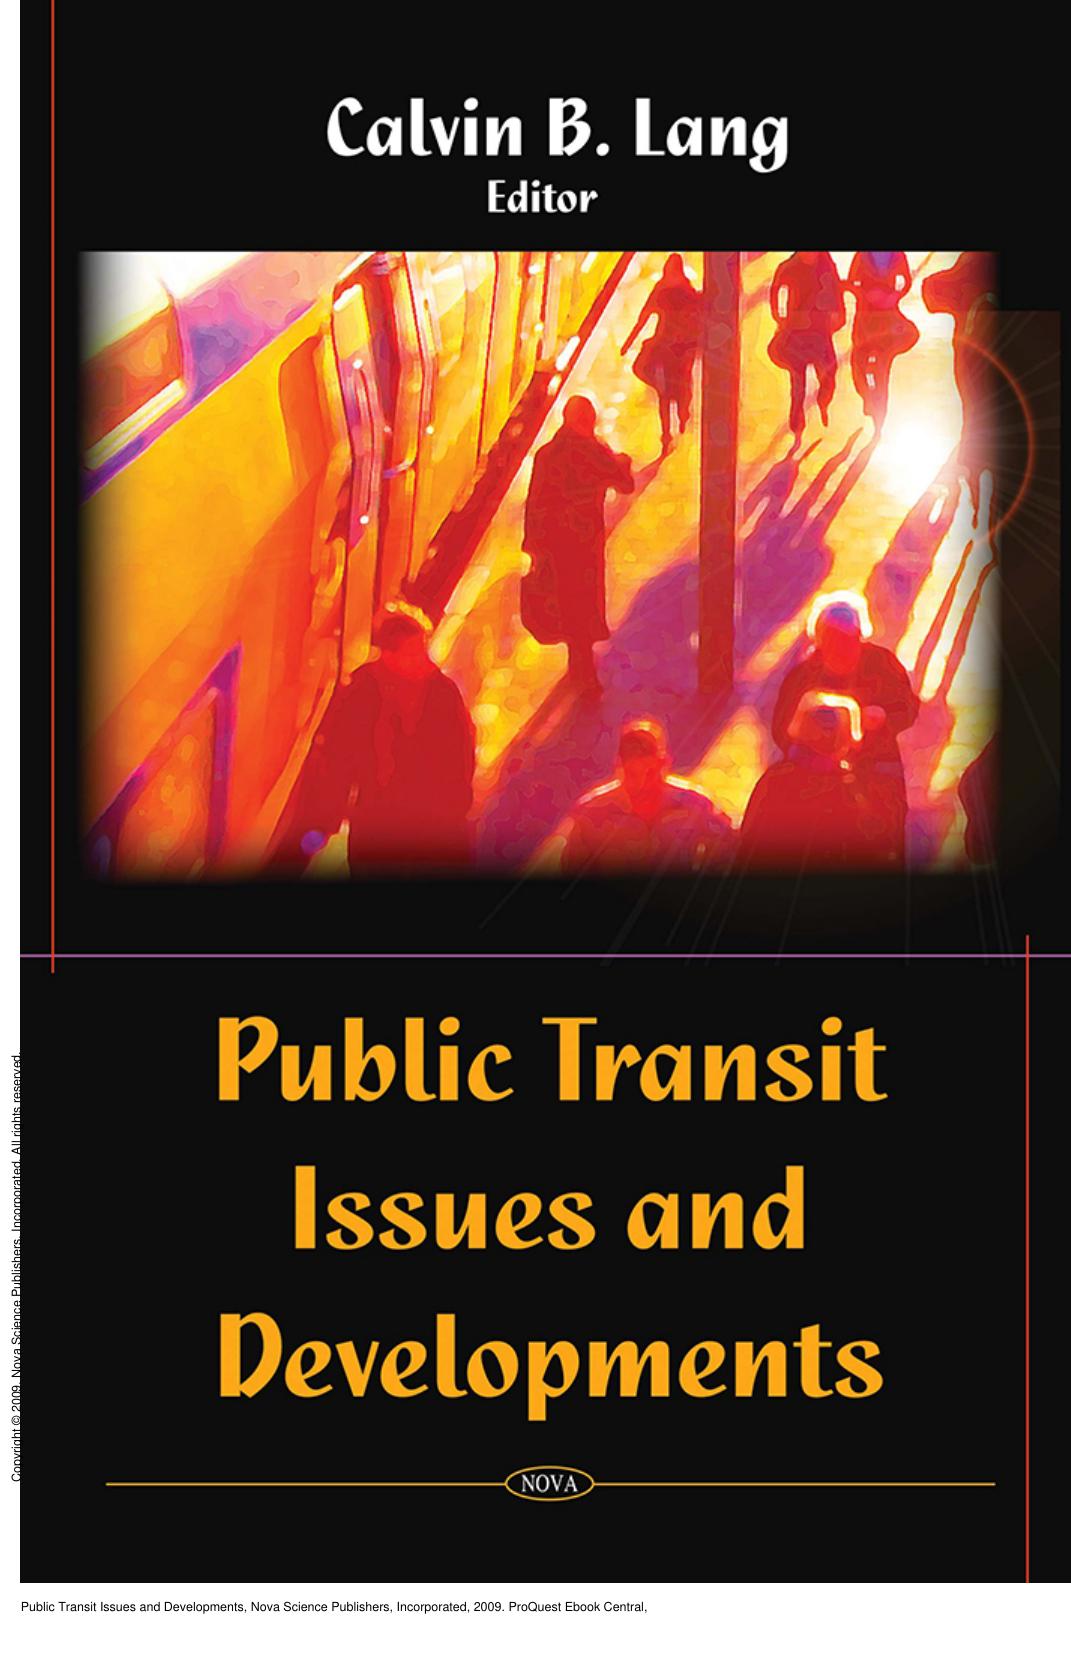 Public Transit Issues and Developments by Calvin B. Lang